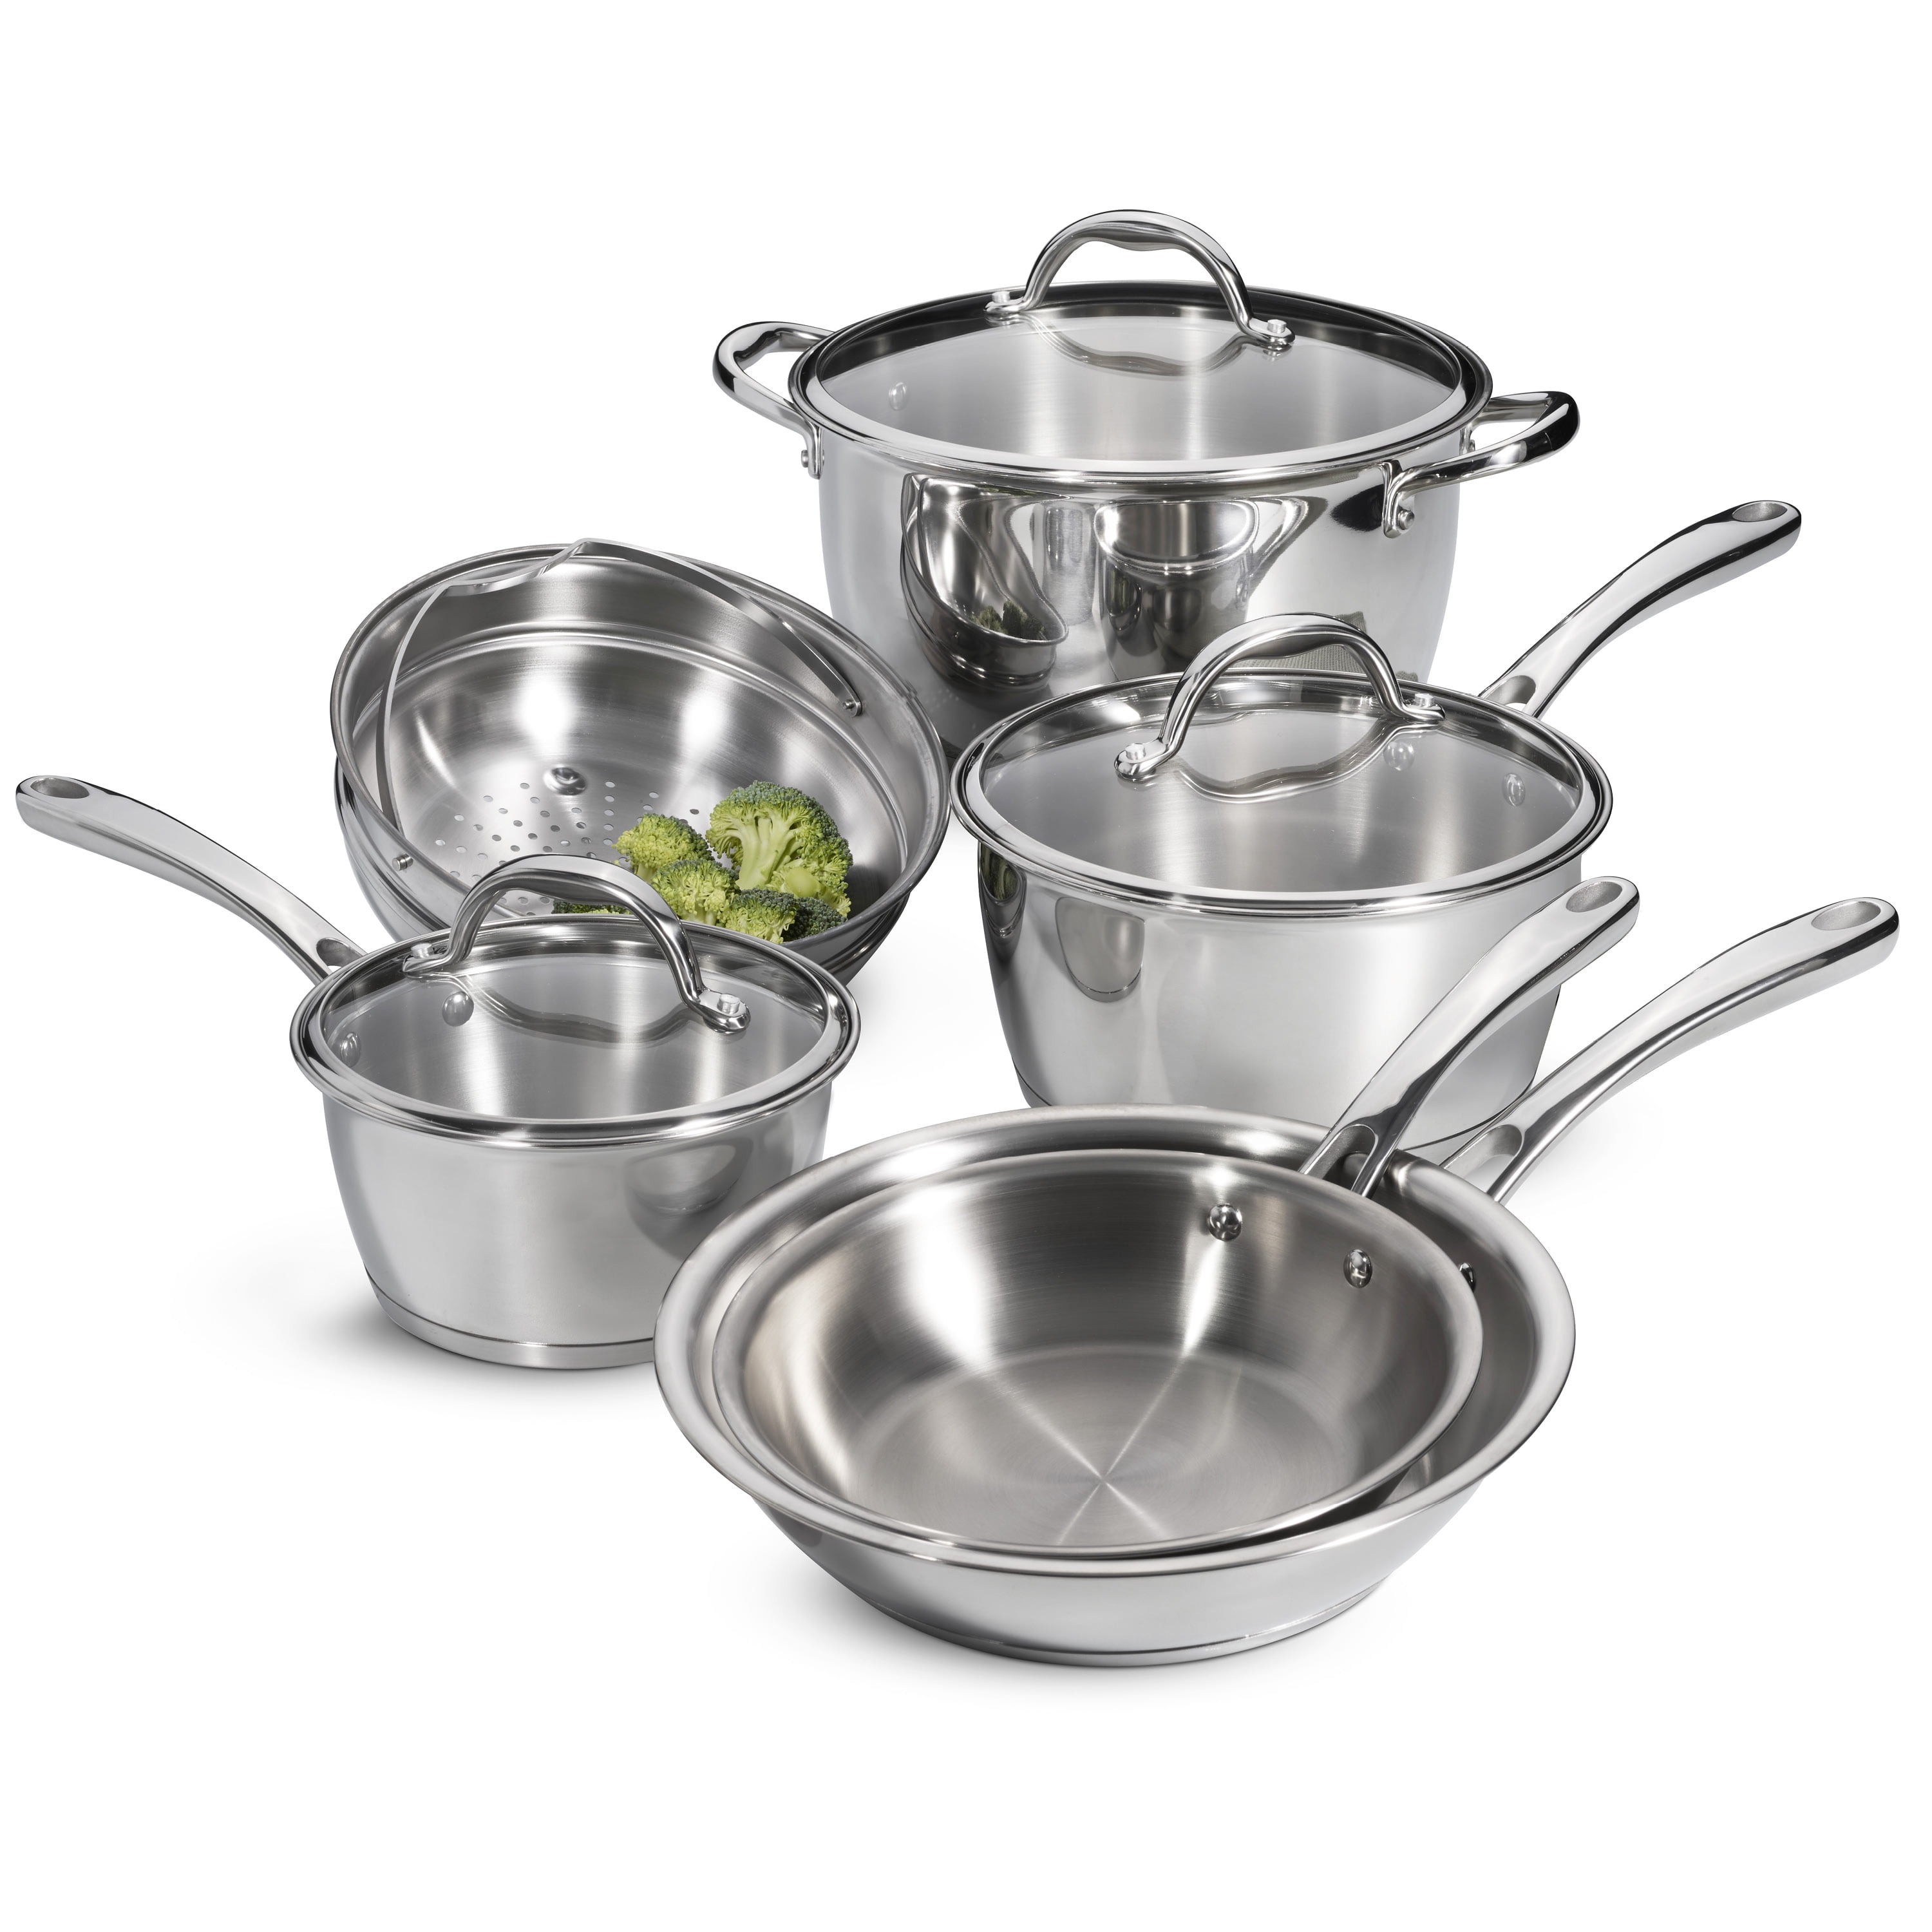 Details about   Tramontina 12-Piece Tri-Ply Clad Stainless Steel Cookware Set 80116/1012DS 